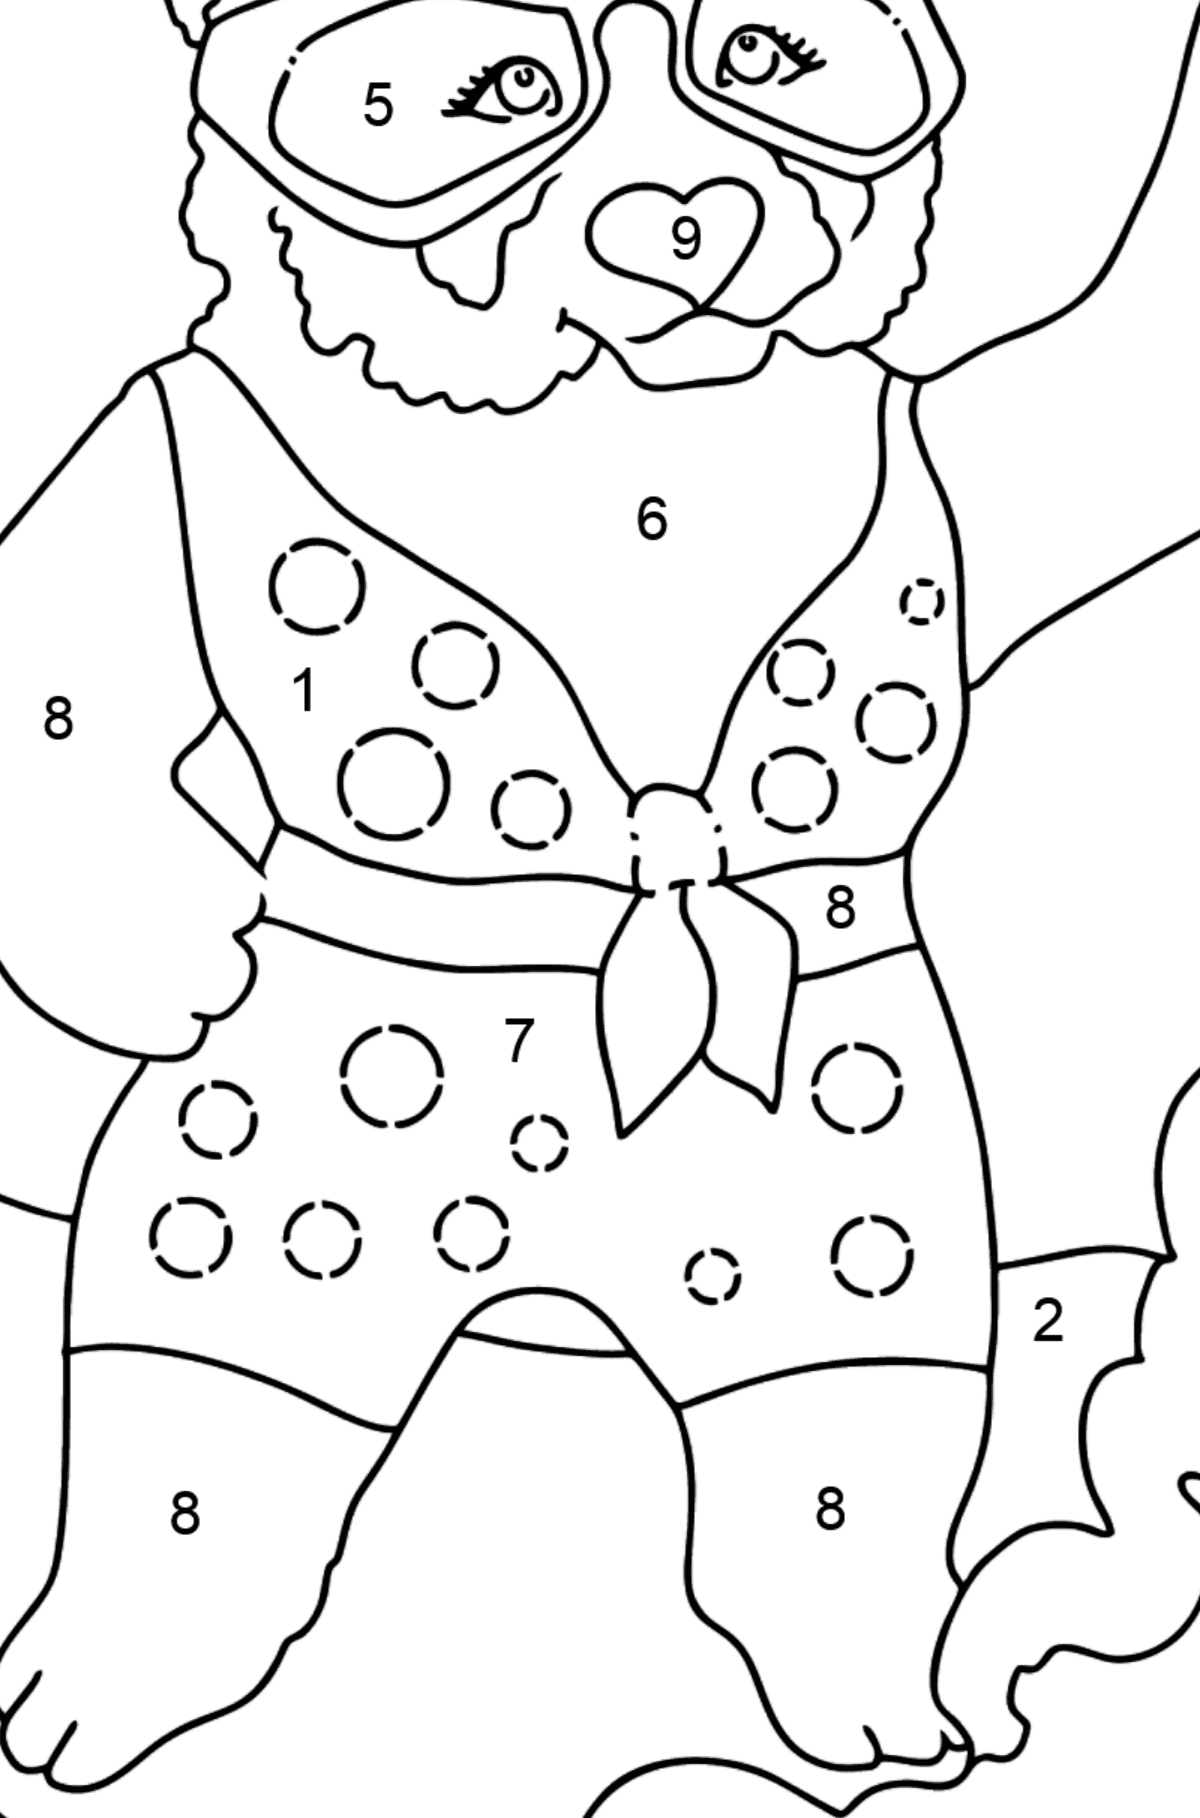 Cartoon Panda coloring page - Coloring by Numbers for Kids